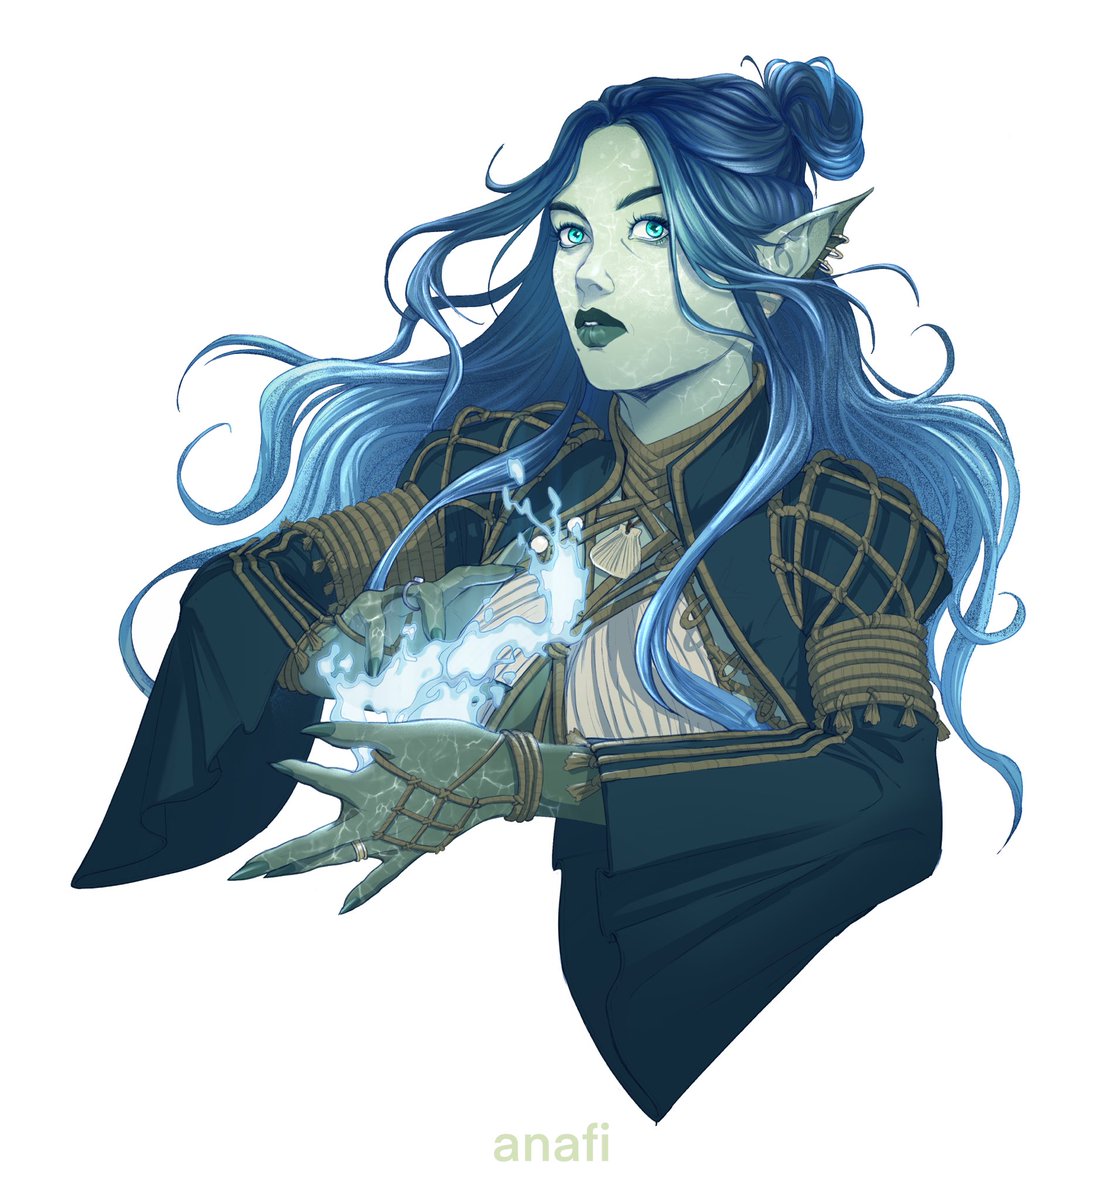 Neriel, water genasi bard played by @luckyminigoose in my one shots 💙 #dnd...